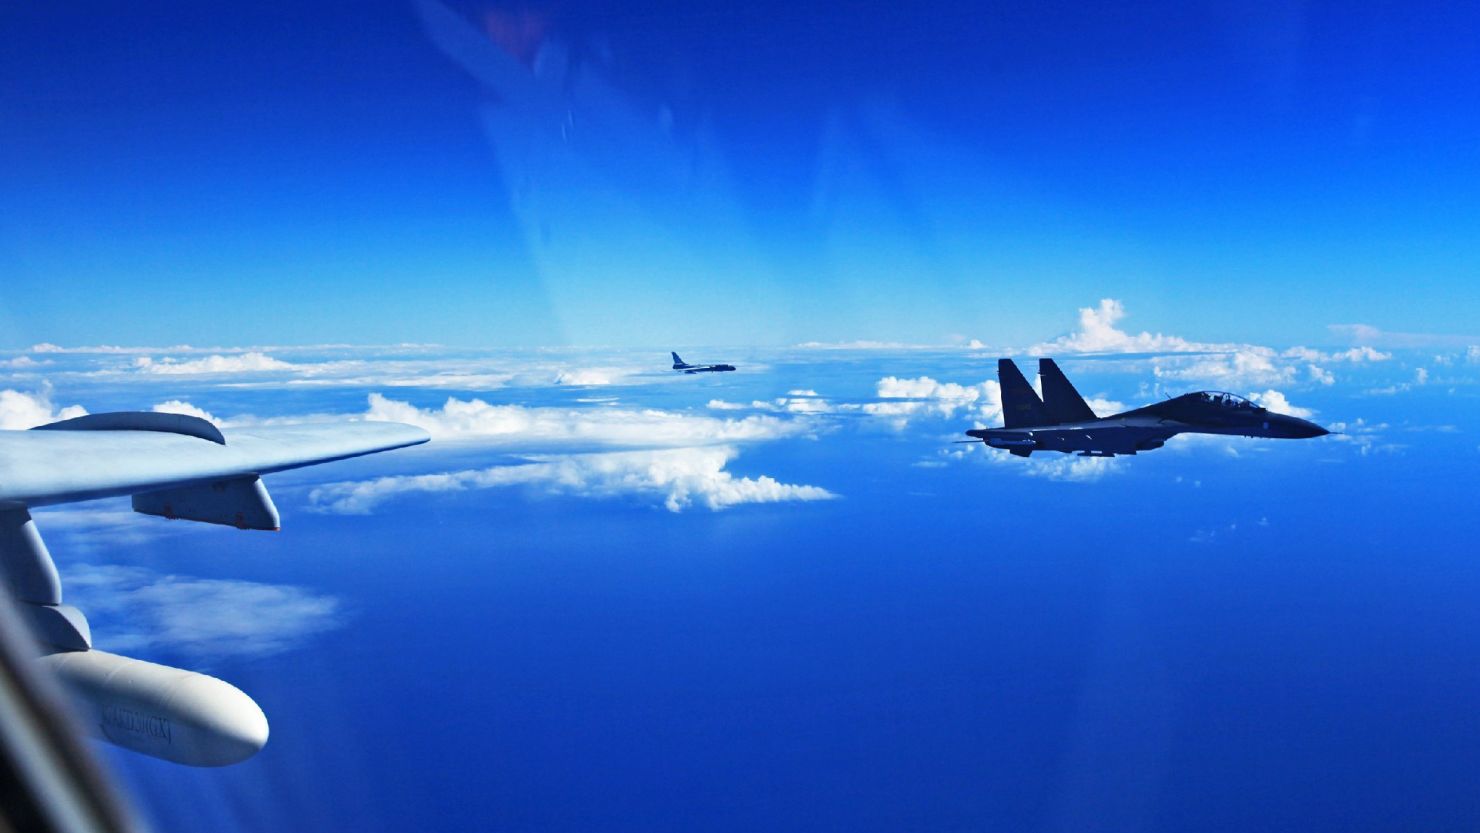 China's Air Force sent more than 40 aircraft to the West Pacific near the Japanese island of Okinawa on Sunday, for what state-media called routine drills.